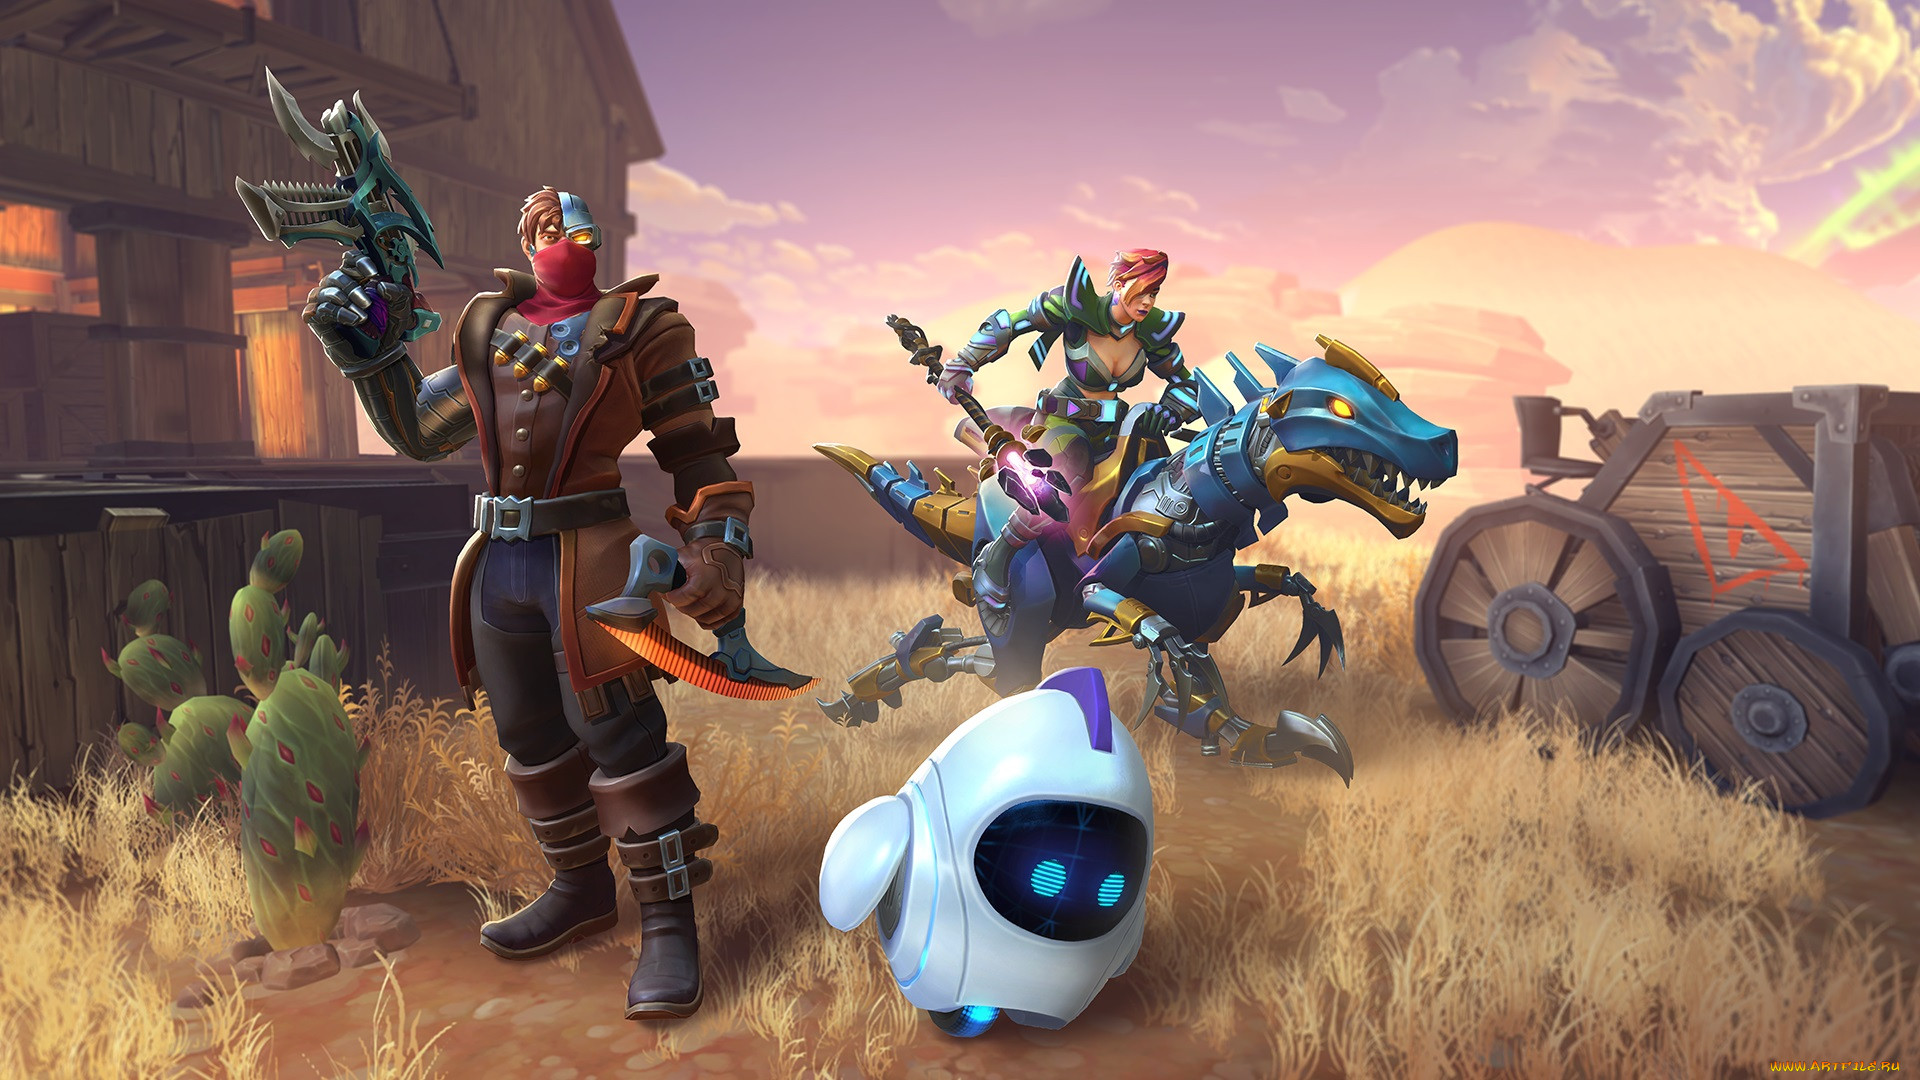  , realm royale, realm, royale